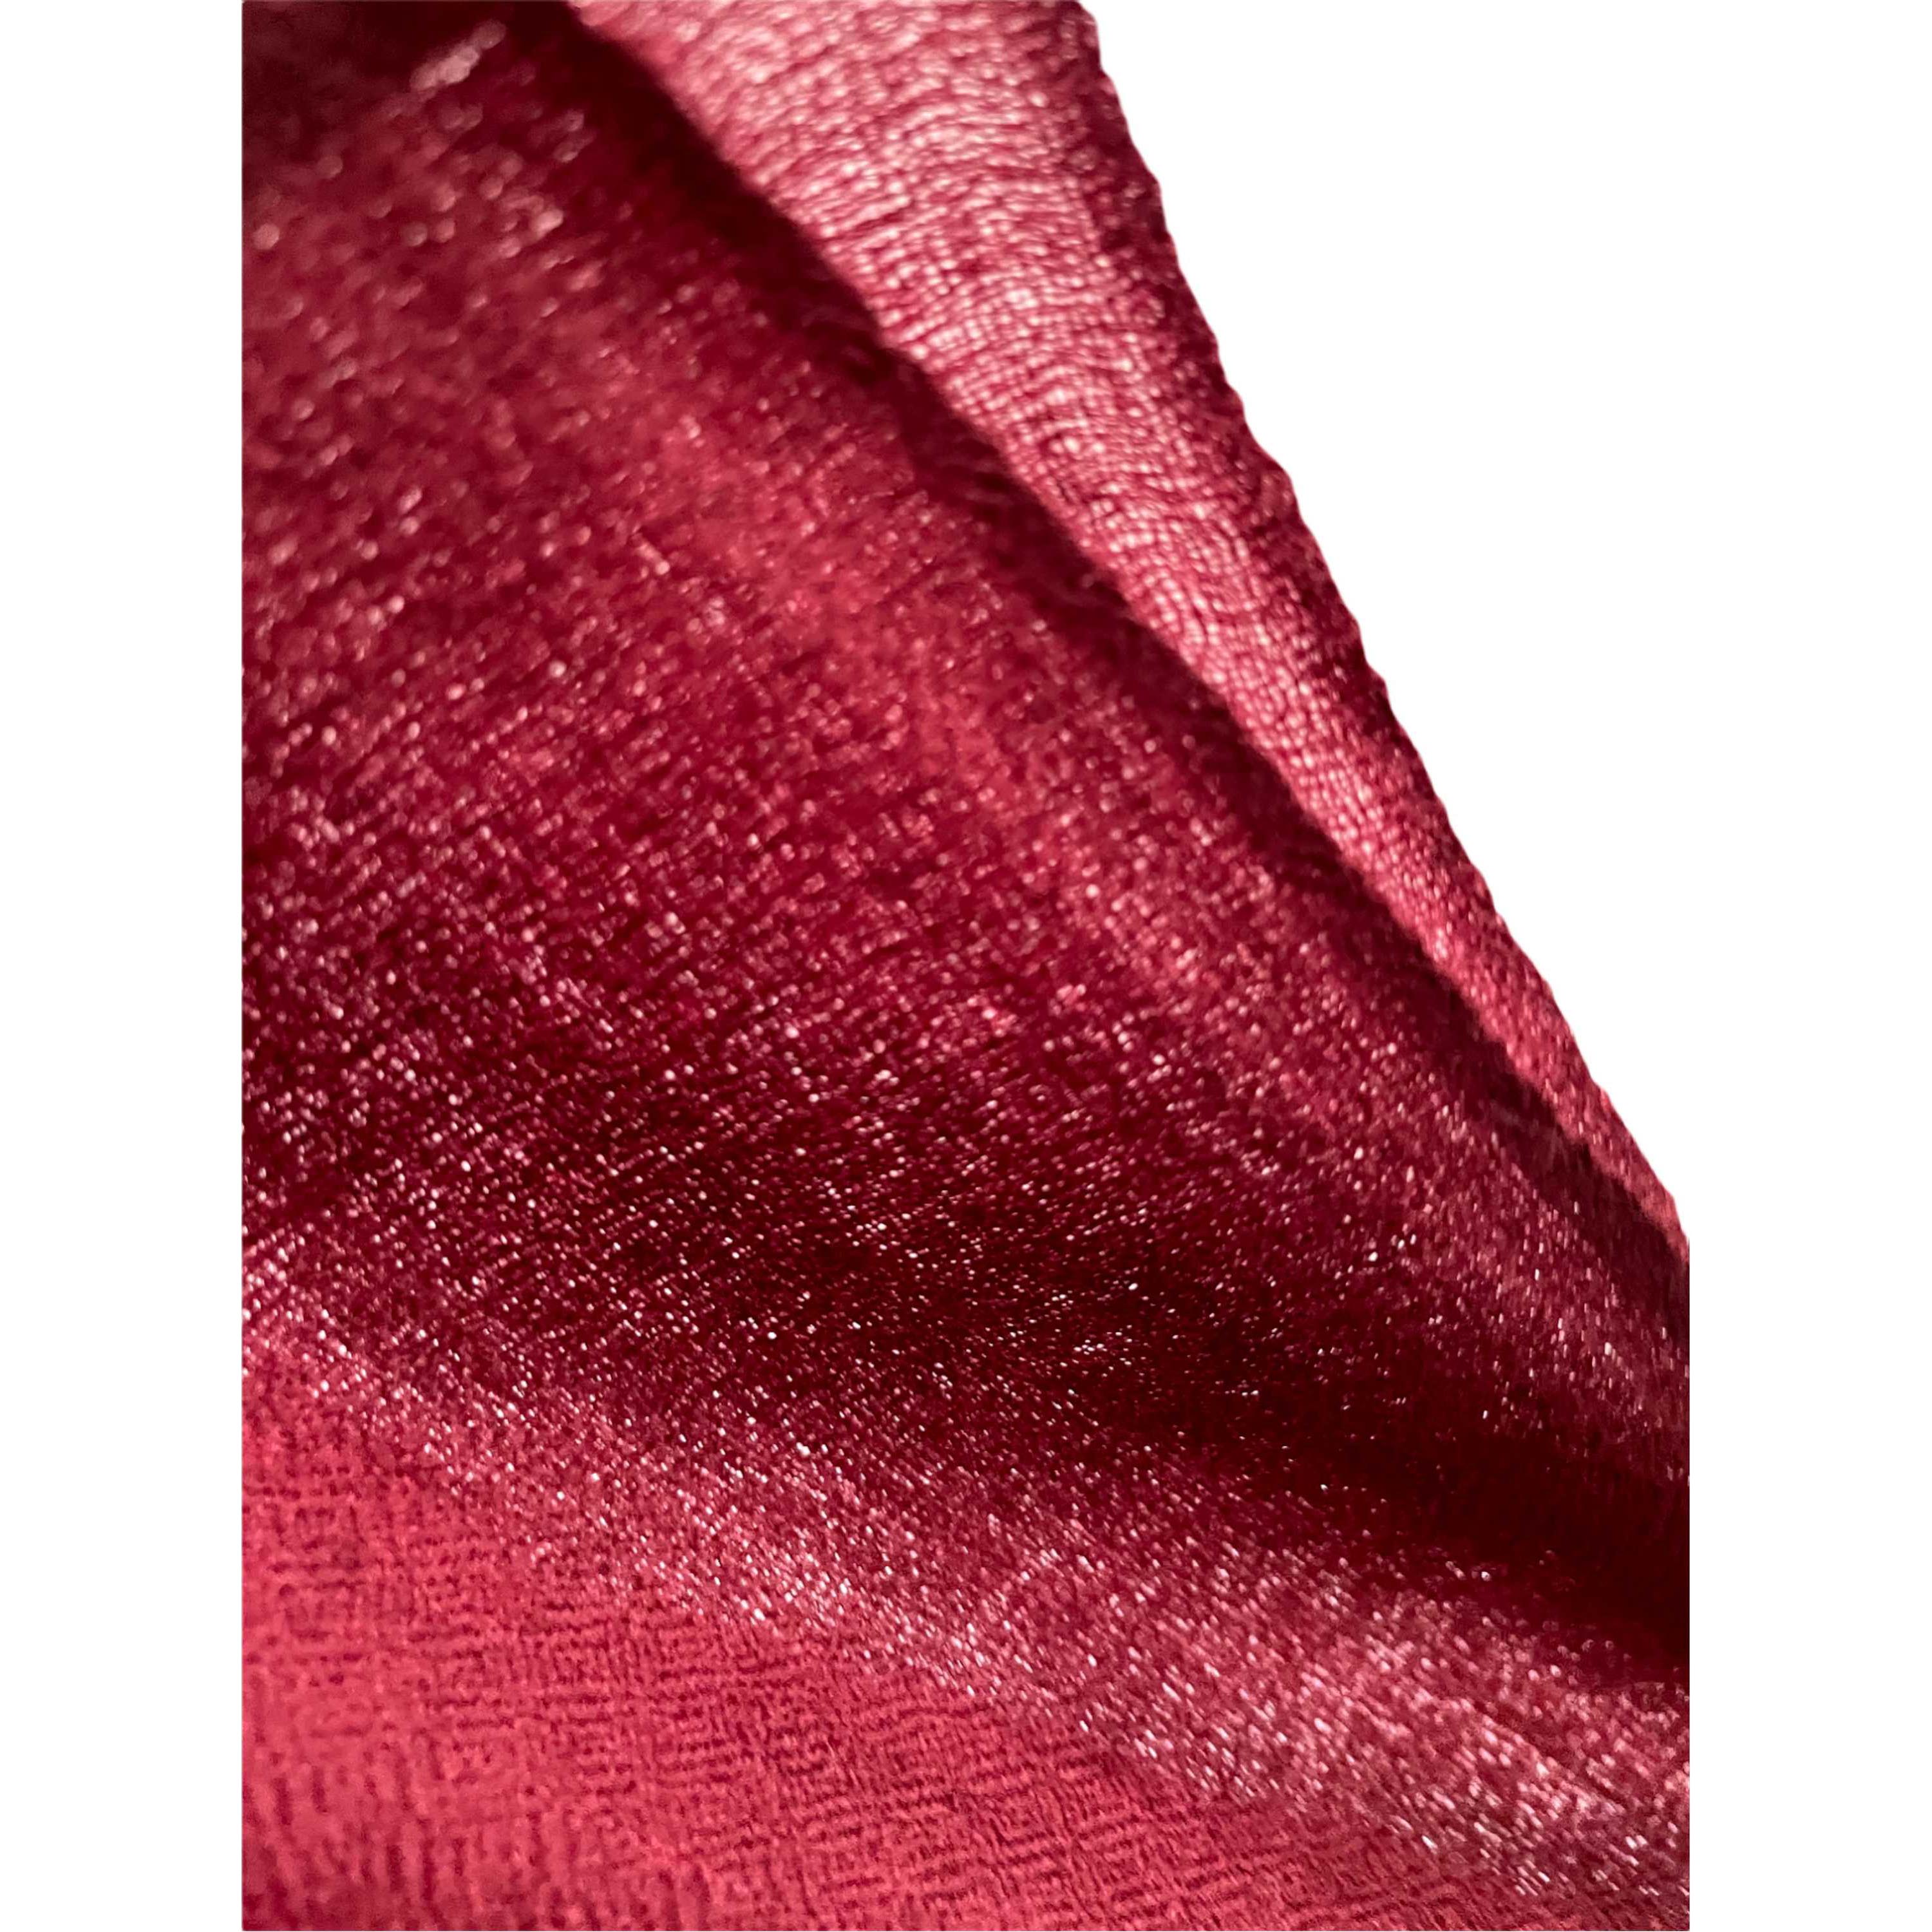 Ring Shawl,a Thin, Soft, And Light Shawl For All-weather Use, Two-ply Wool, Real Pashmina Wool, Dark Red